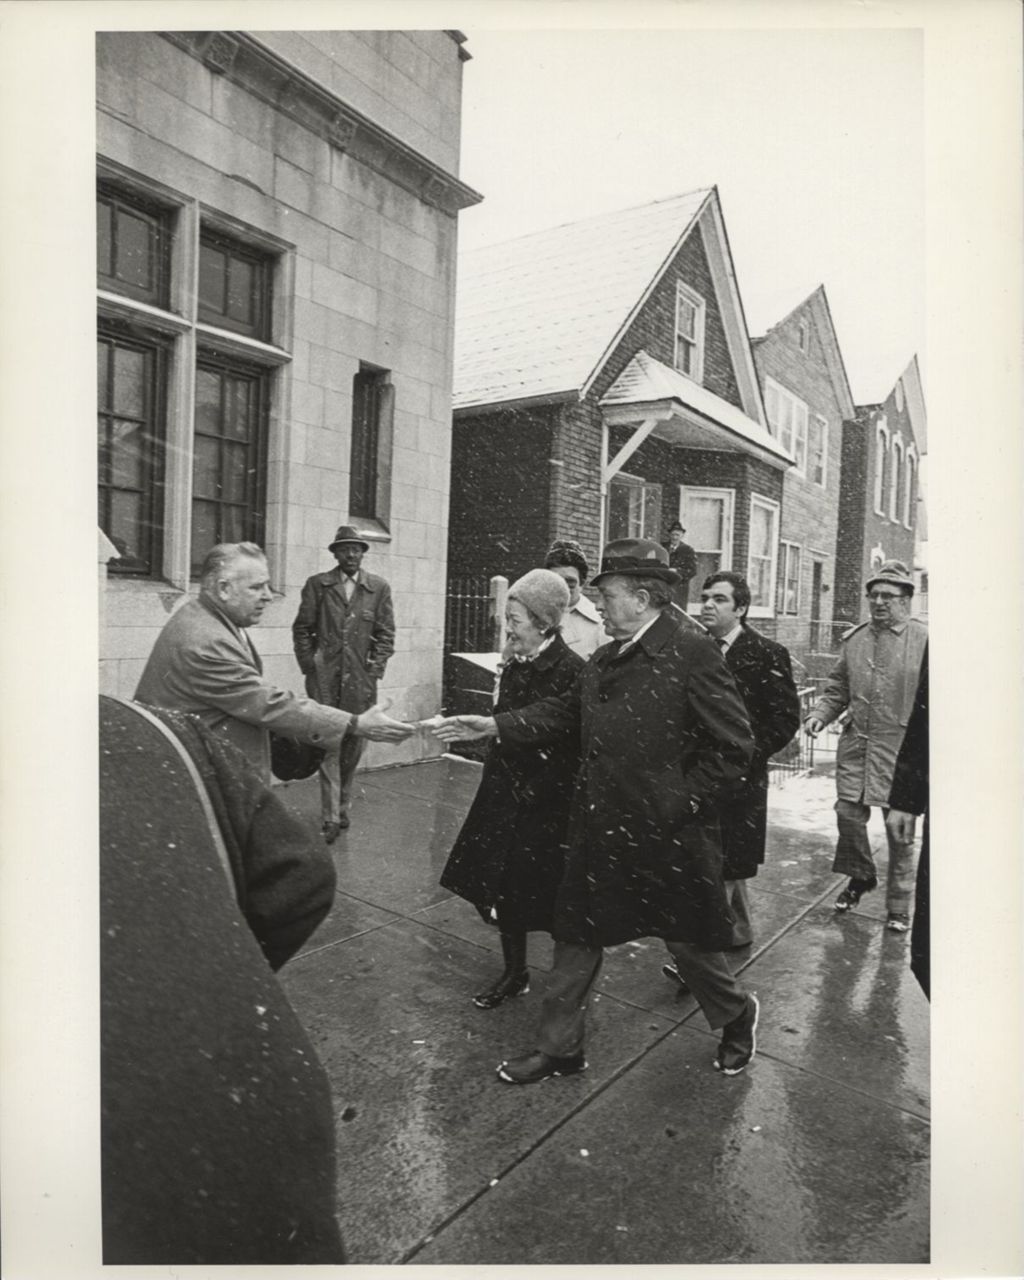 Miniature of Richard J. Daley on his way to the polls with Eleanor and John Daley